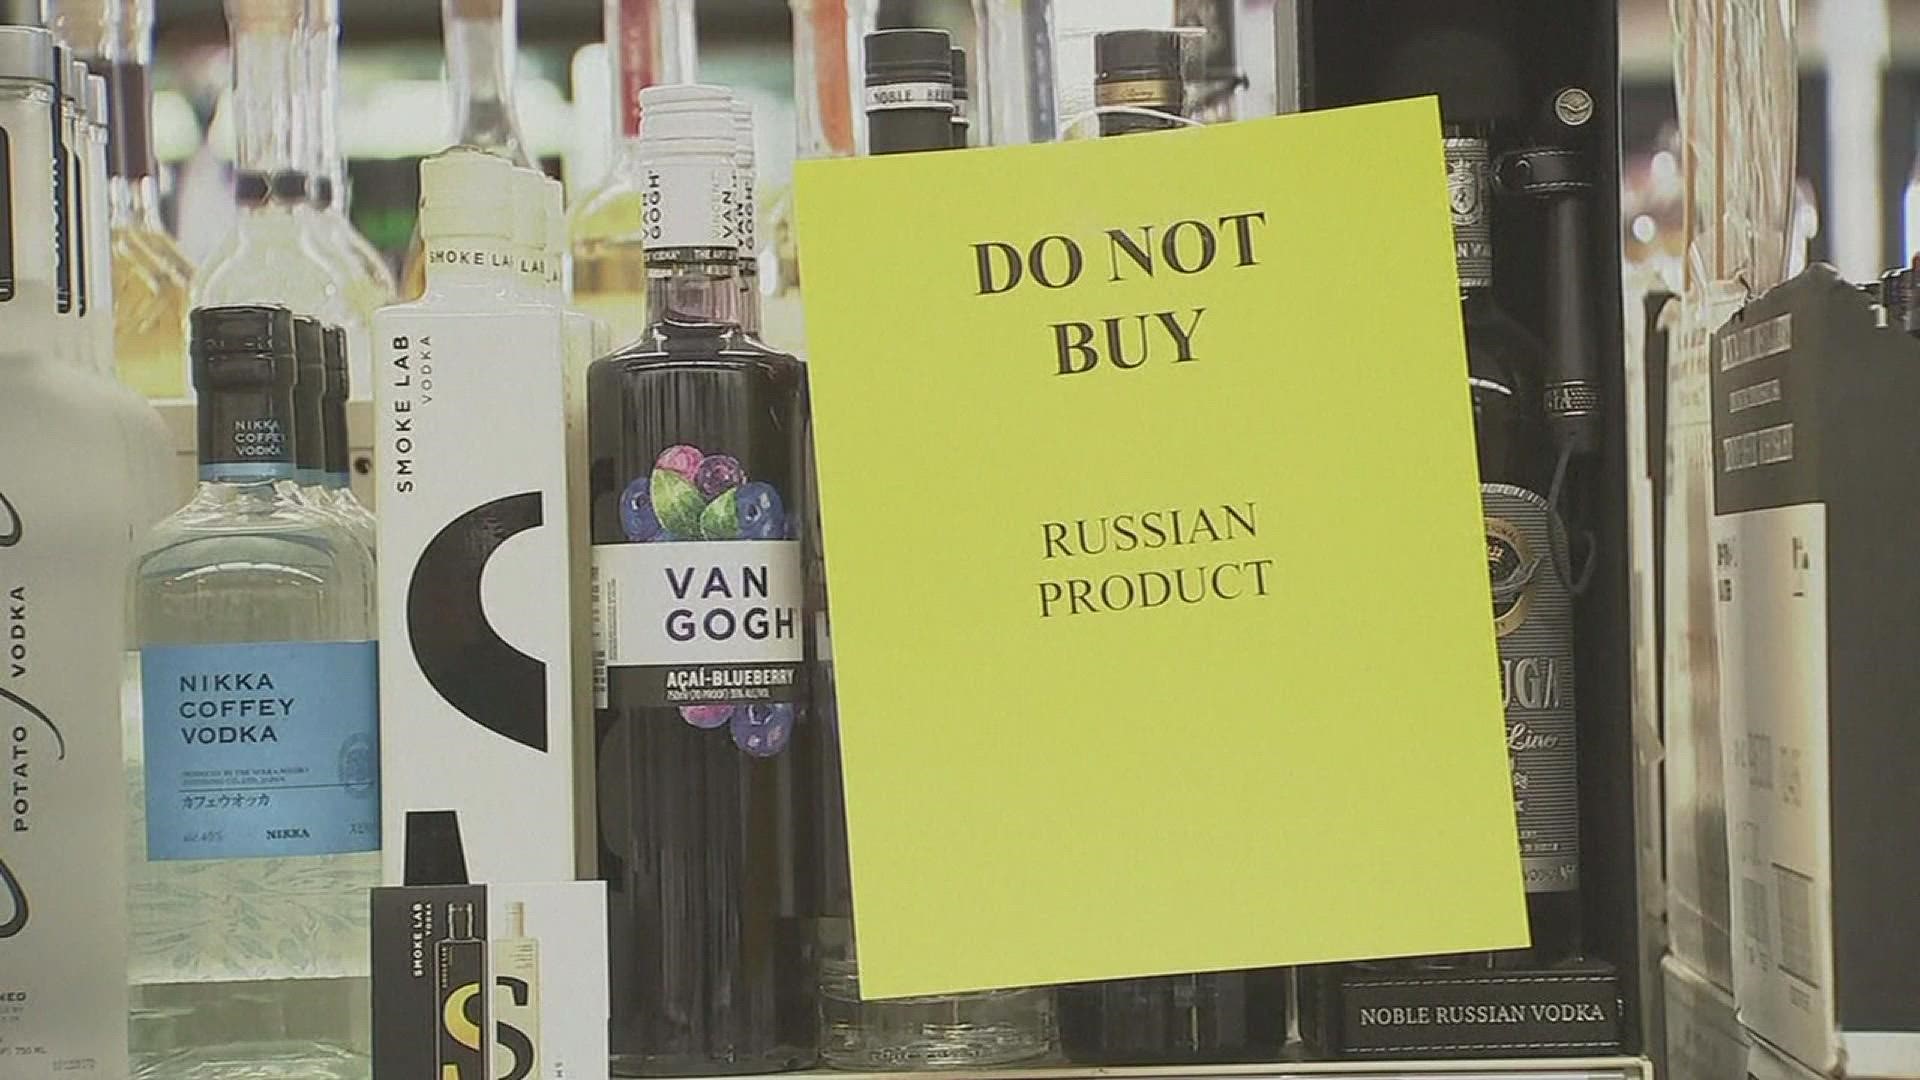 Gov. Kim Reynolds is directing the state's alcohol control authority to remove all Russian-produced liquors from its purchase list as tensions heighten in Europe.